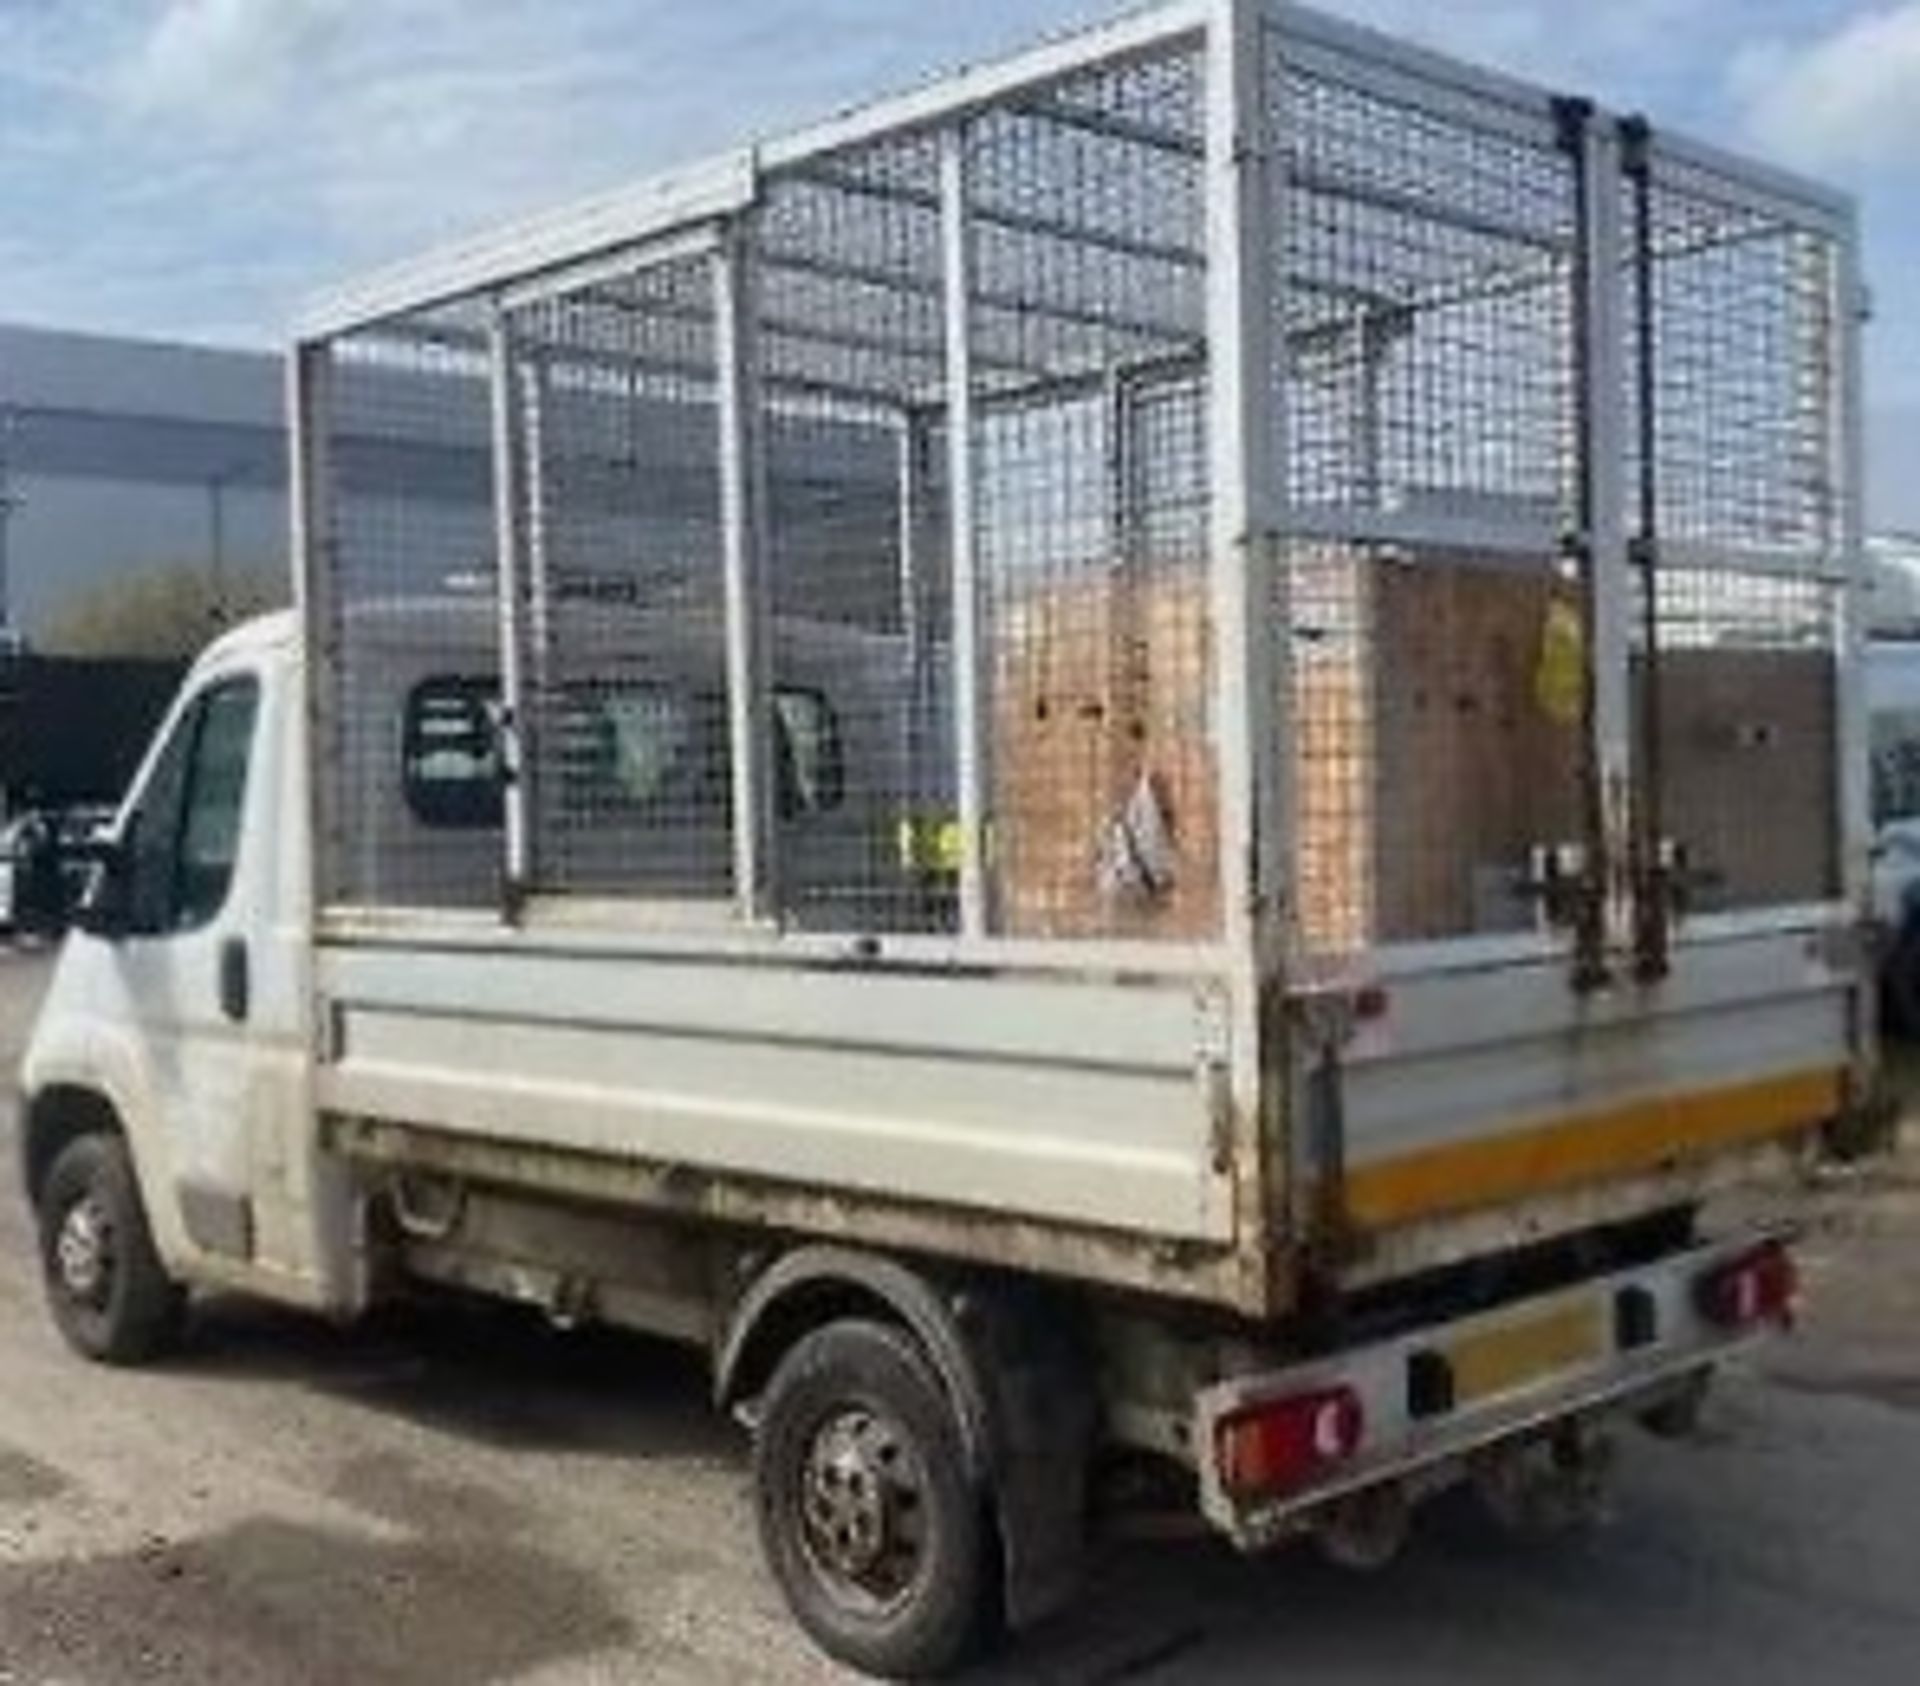 2017 CITROEN RELAY CAGE TIPPER (NO ENGINE OR GEARBOX) - Image 4 of 13